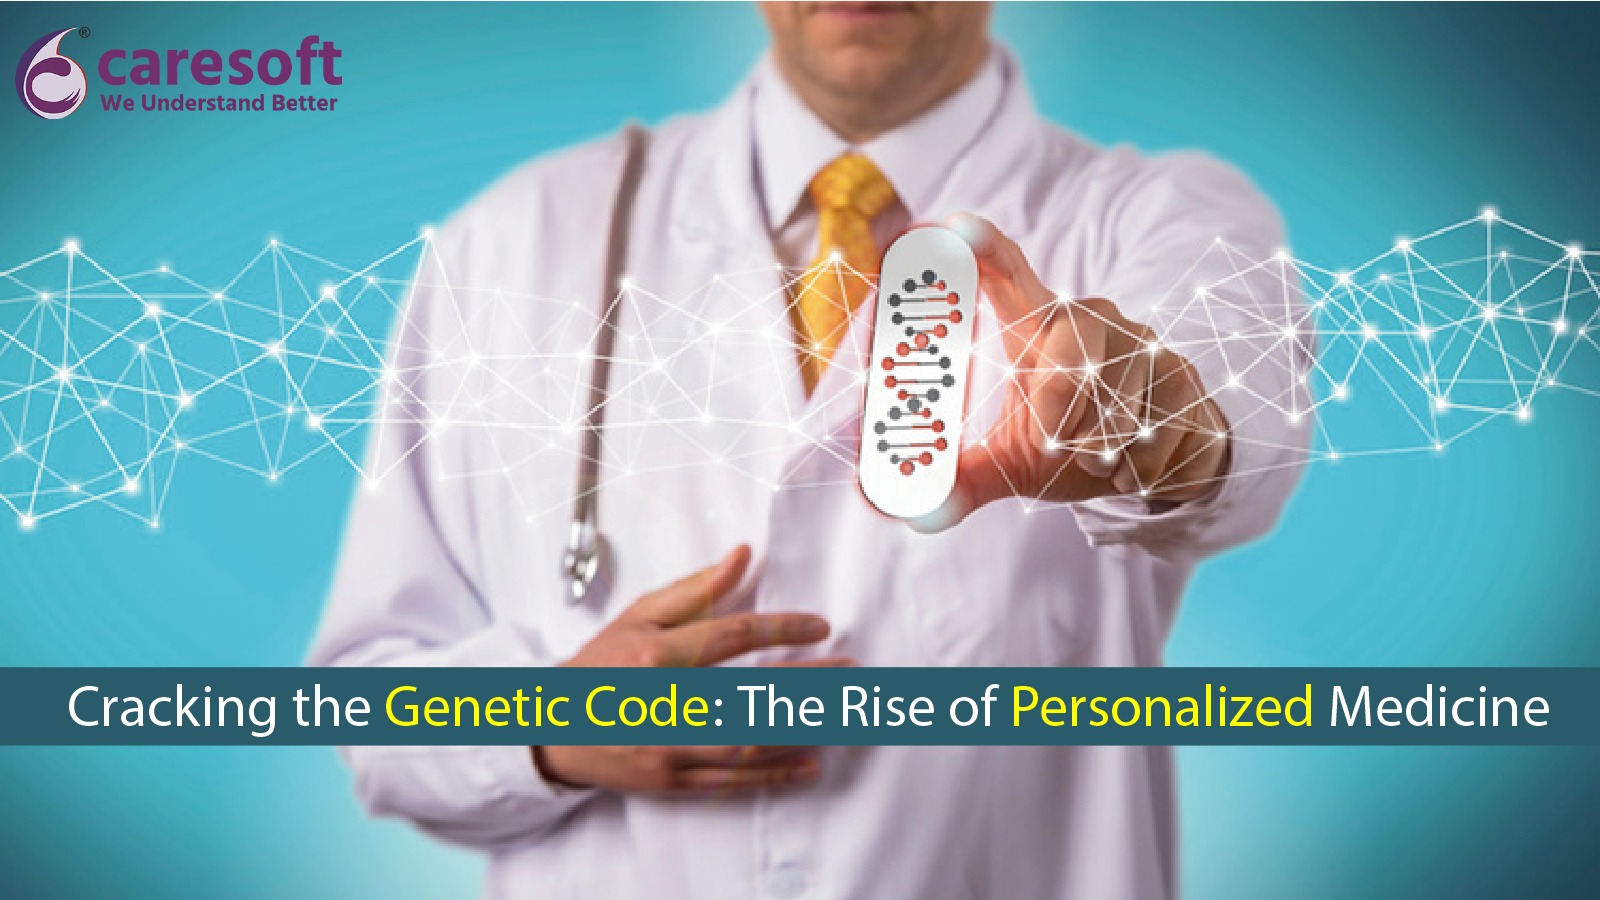 Cracking the Genetic Code: The Rise of Personalized Medicine